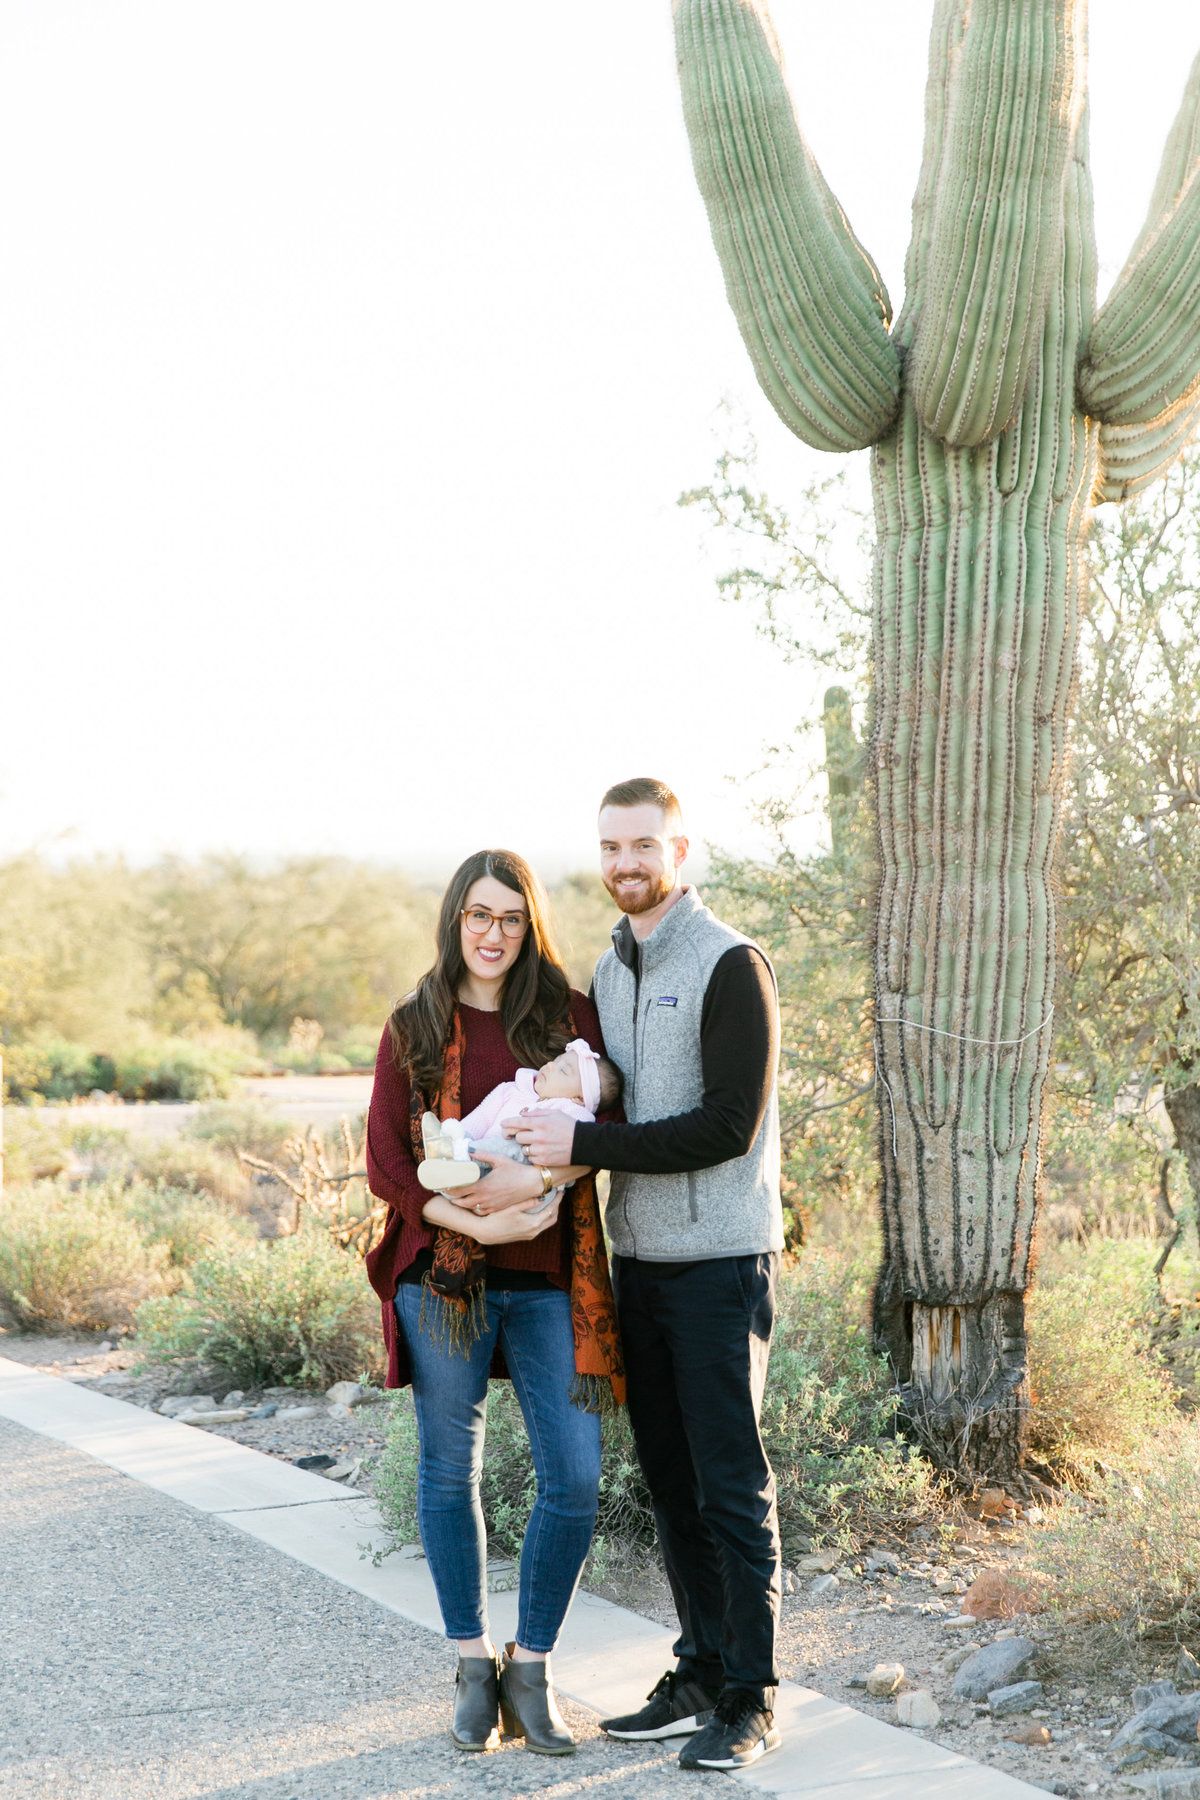 Karlie Colleen Photography - Scottsdale Family Photography - Lauren & Family-66